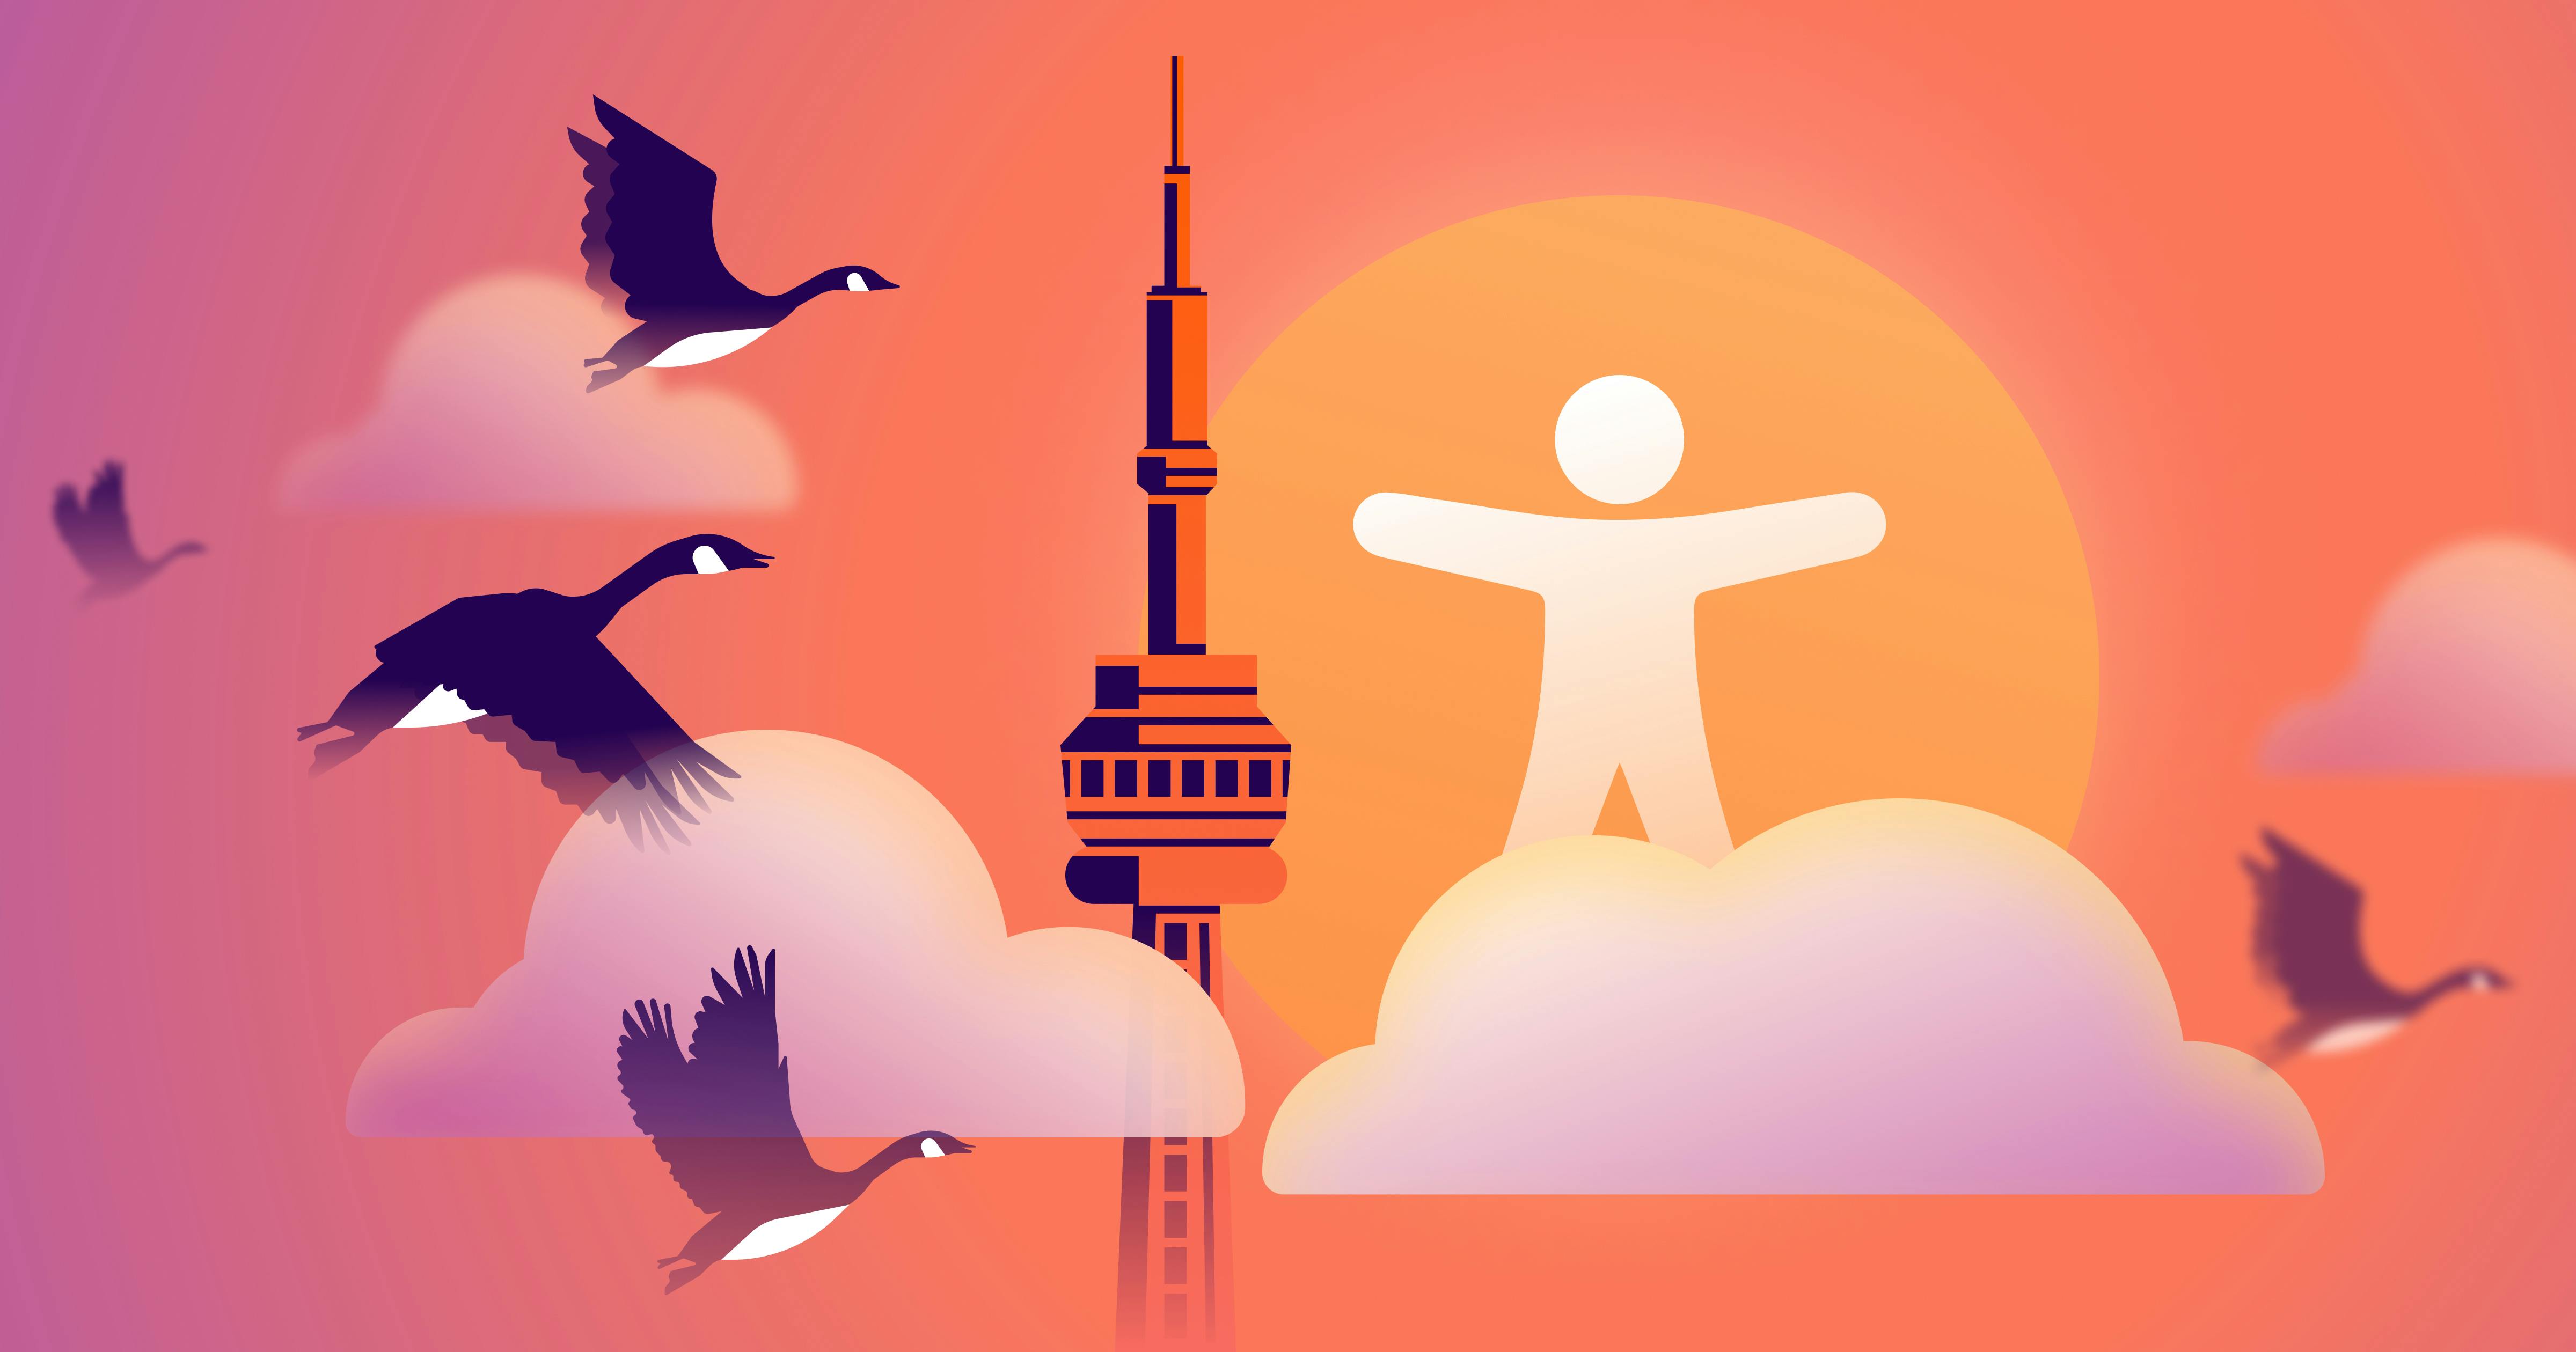 A stylized version of Ontario's CN Tower, with Canadien Geese flying past and an accessibility icon in the background.